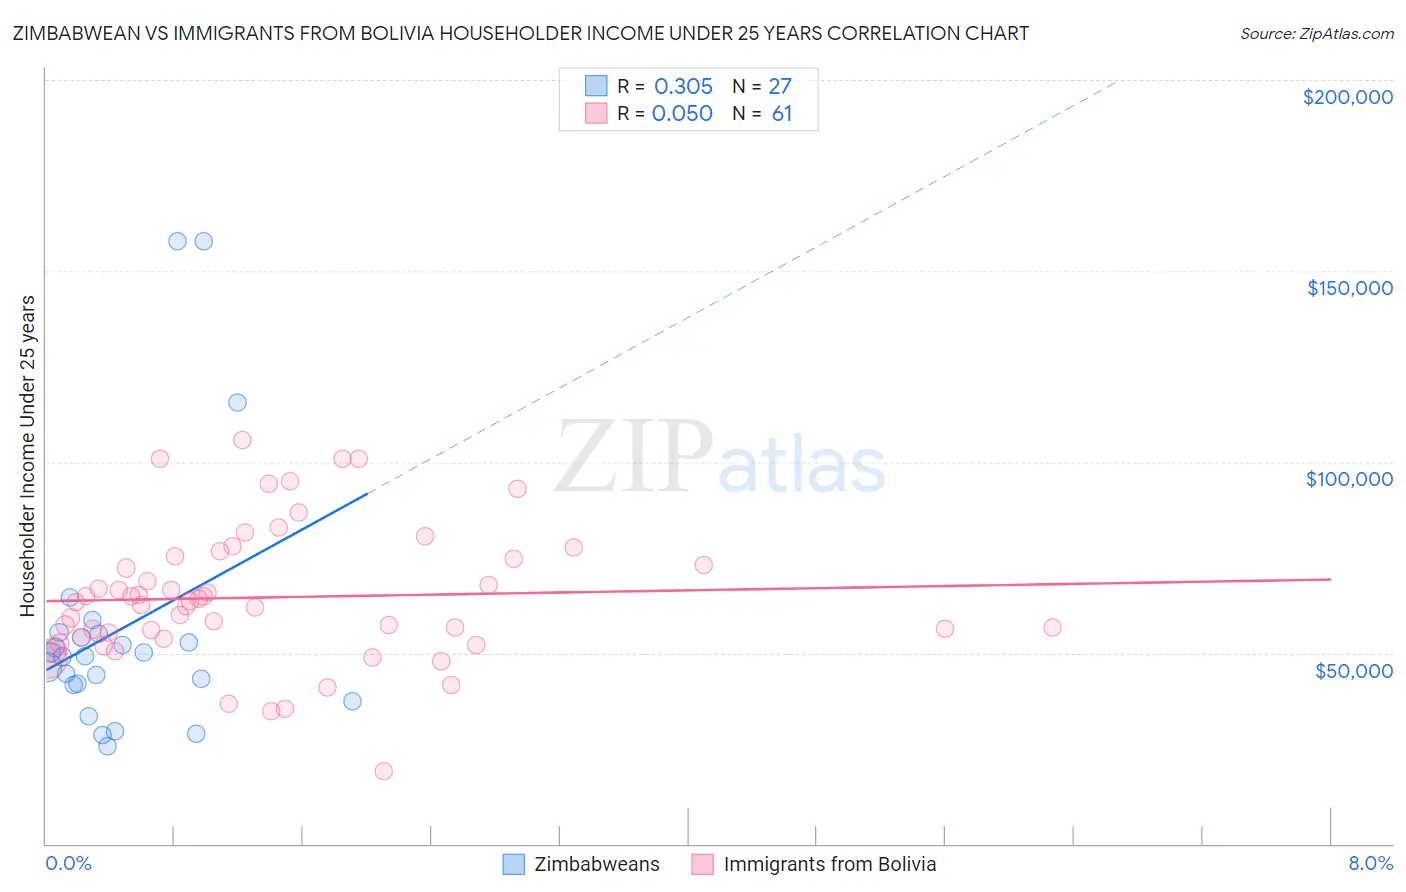 Zimbabwean vs Immigrants from Bolivia Householder Income Under 25 years